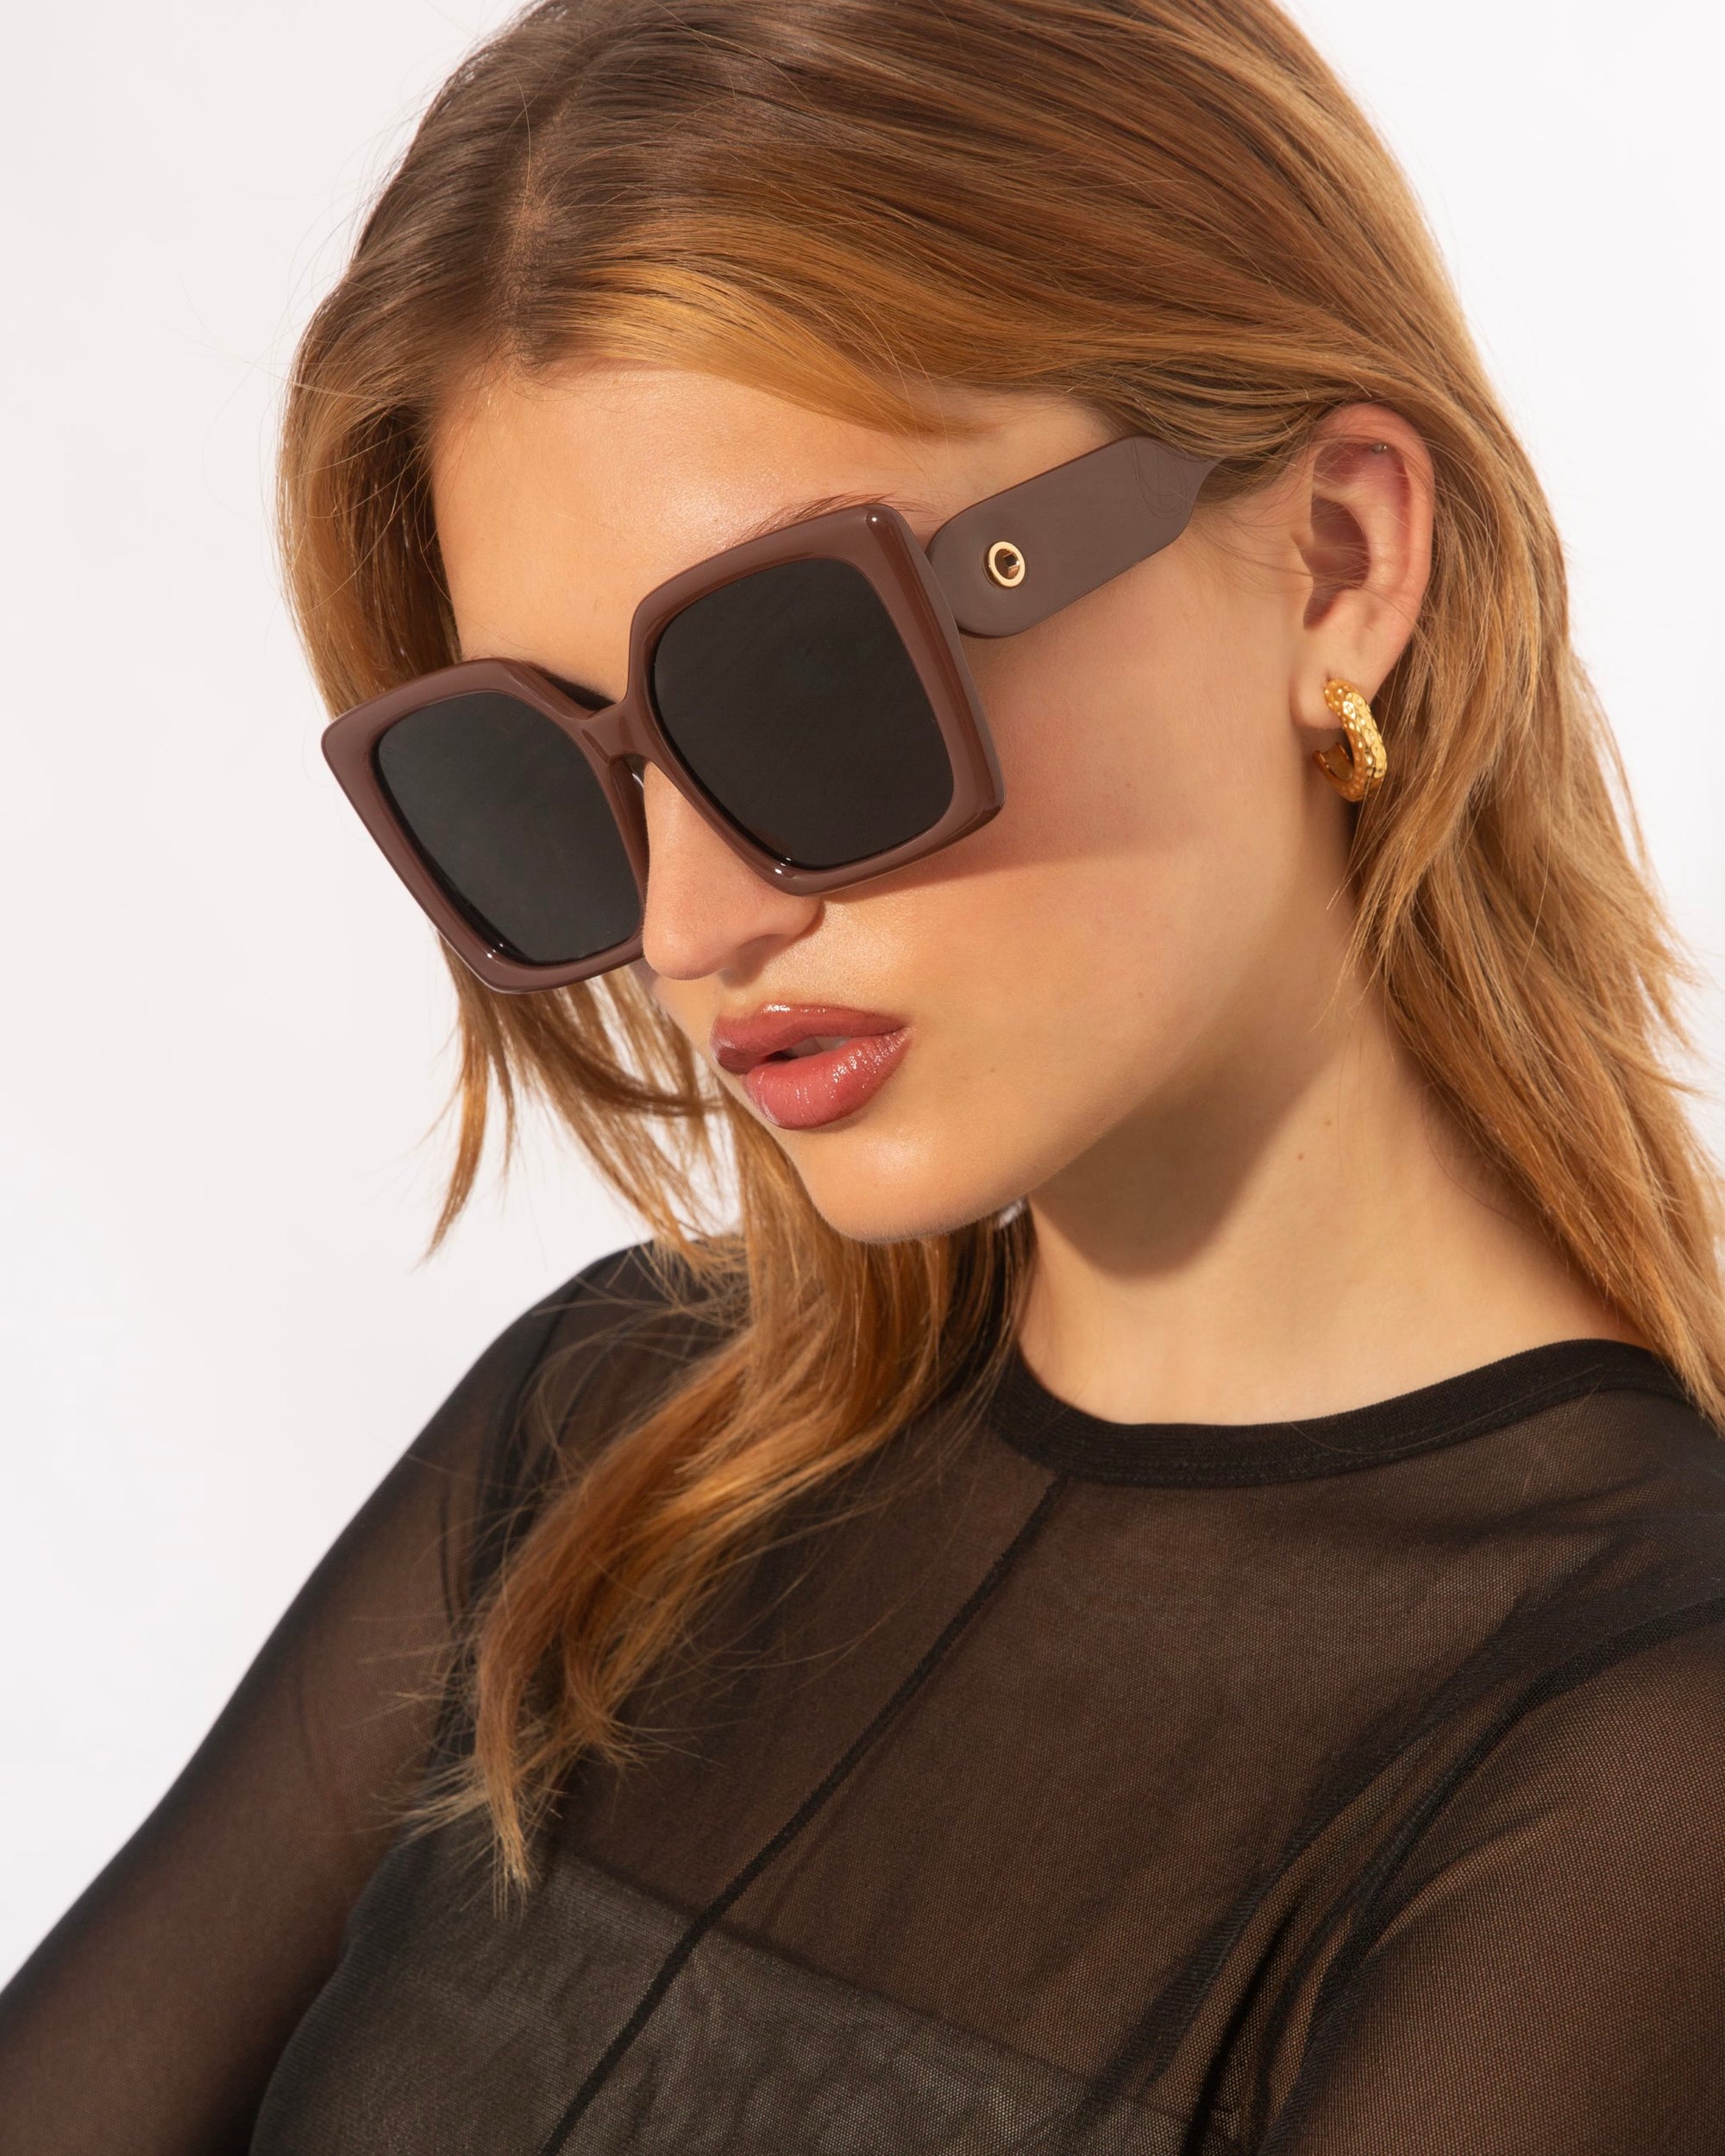 A person with shoulder-length light brown hair, wearing elegant eyewear characterized by oversized soft-square silhouettes and a pair of gold hoop earrings, is looking downward. The person is dressed in a sheer black top with a high neckline. The background is plain white. They are wearing Eos by For Art&#39;s Sake®.